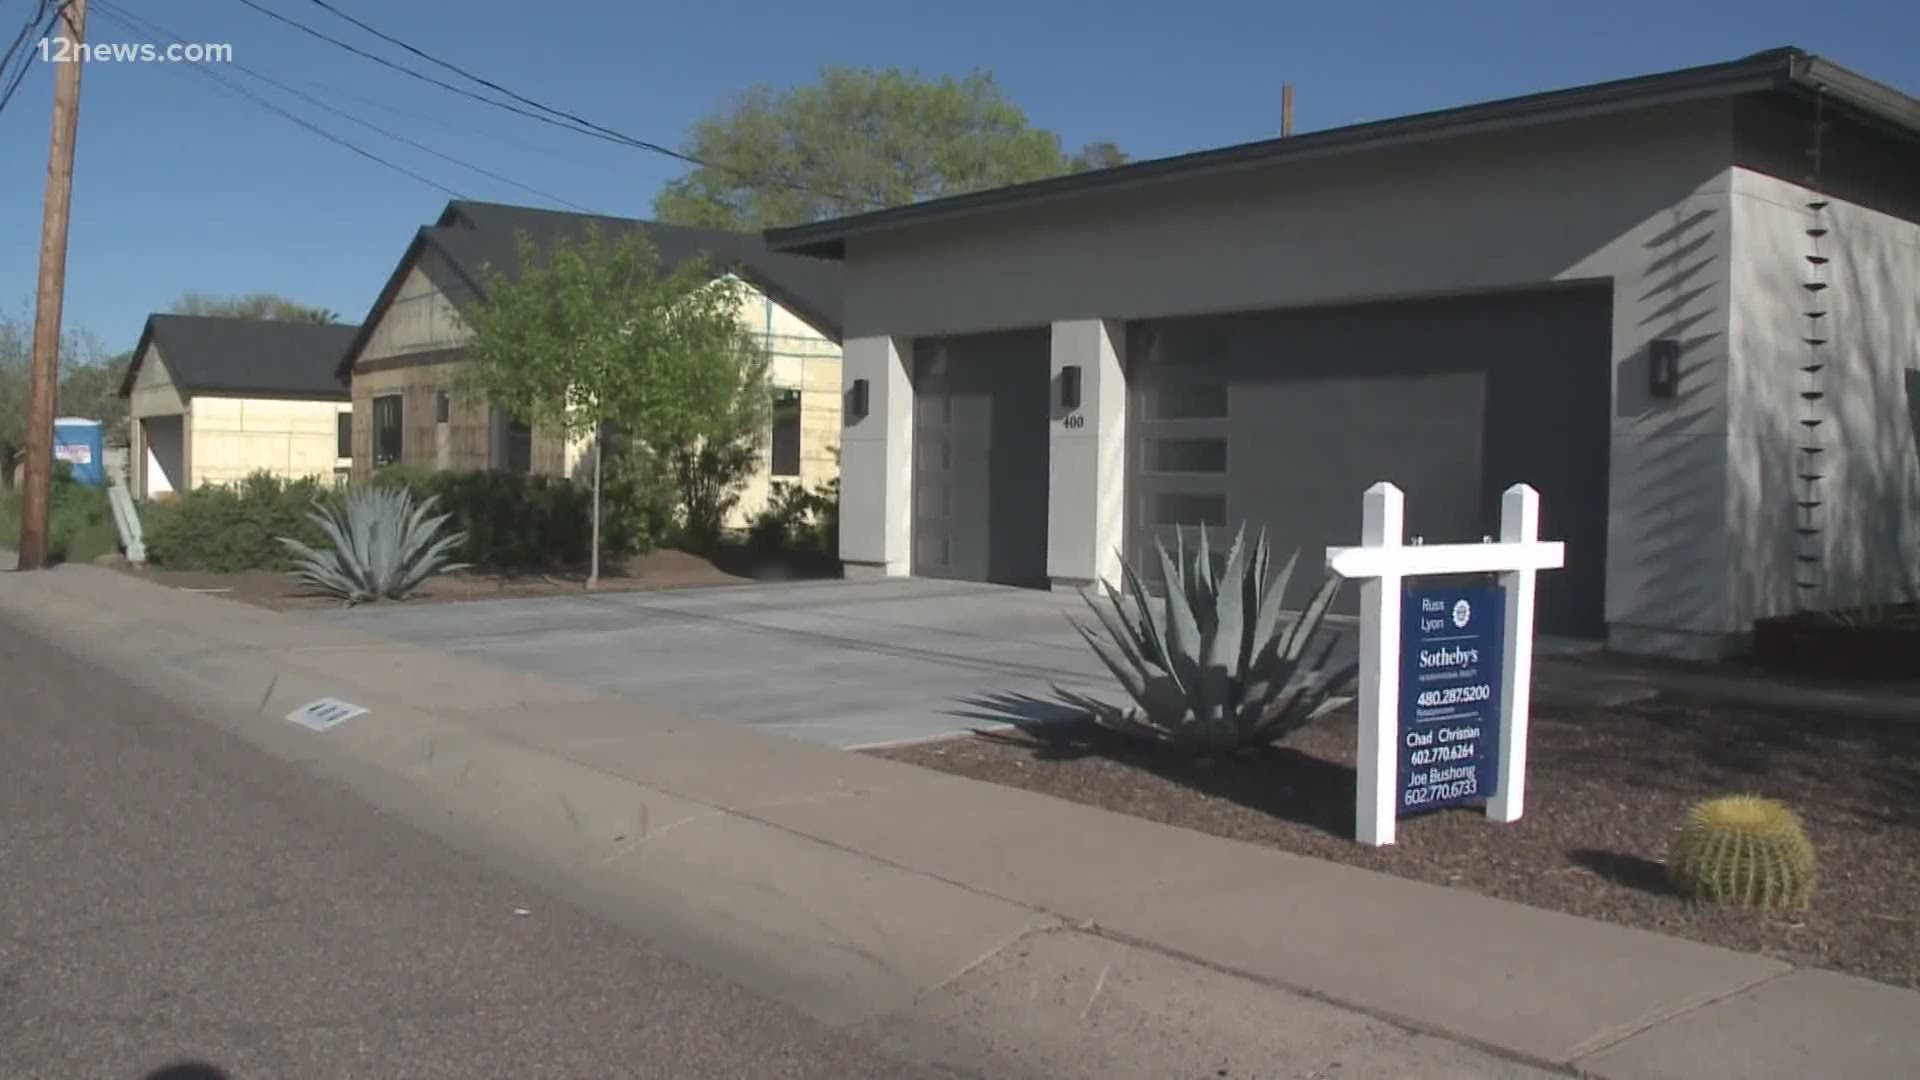 In today's hot housing market, is it even possible for the typical family to afford to buy a new home in the Valley? Mitch Carr has more on this story.